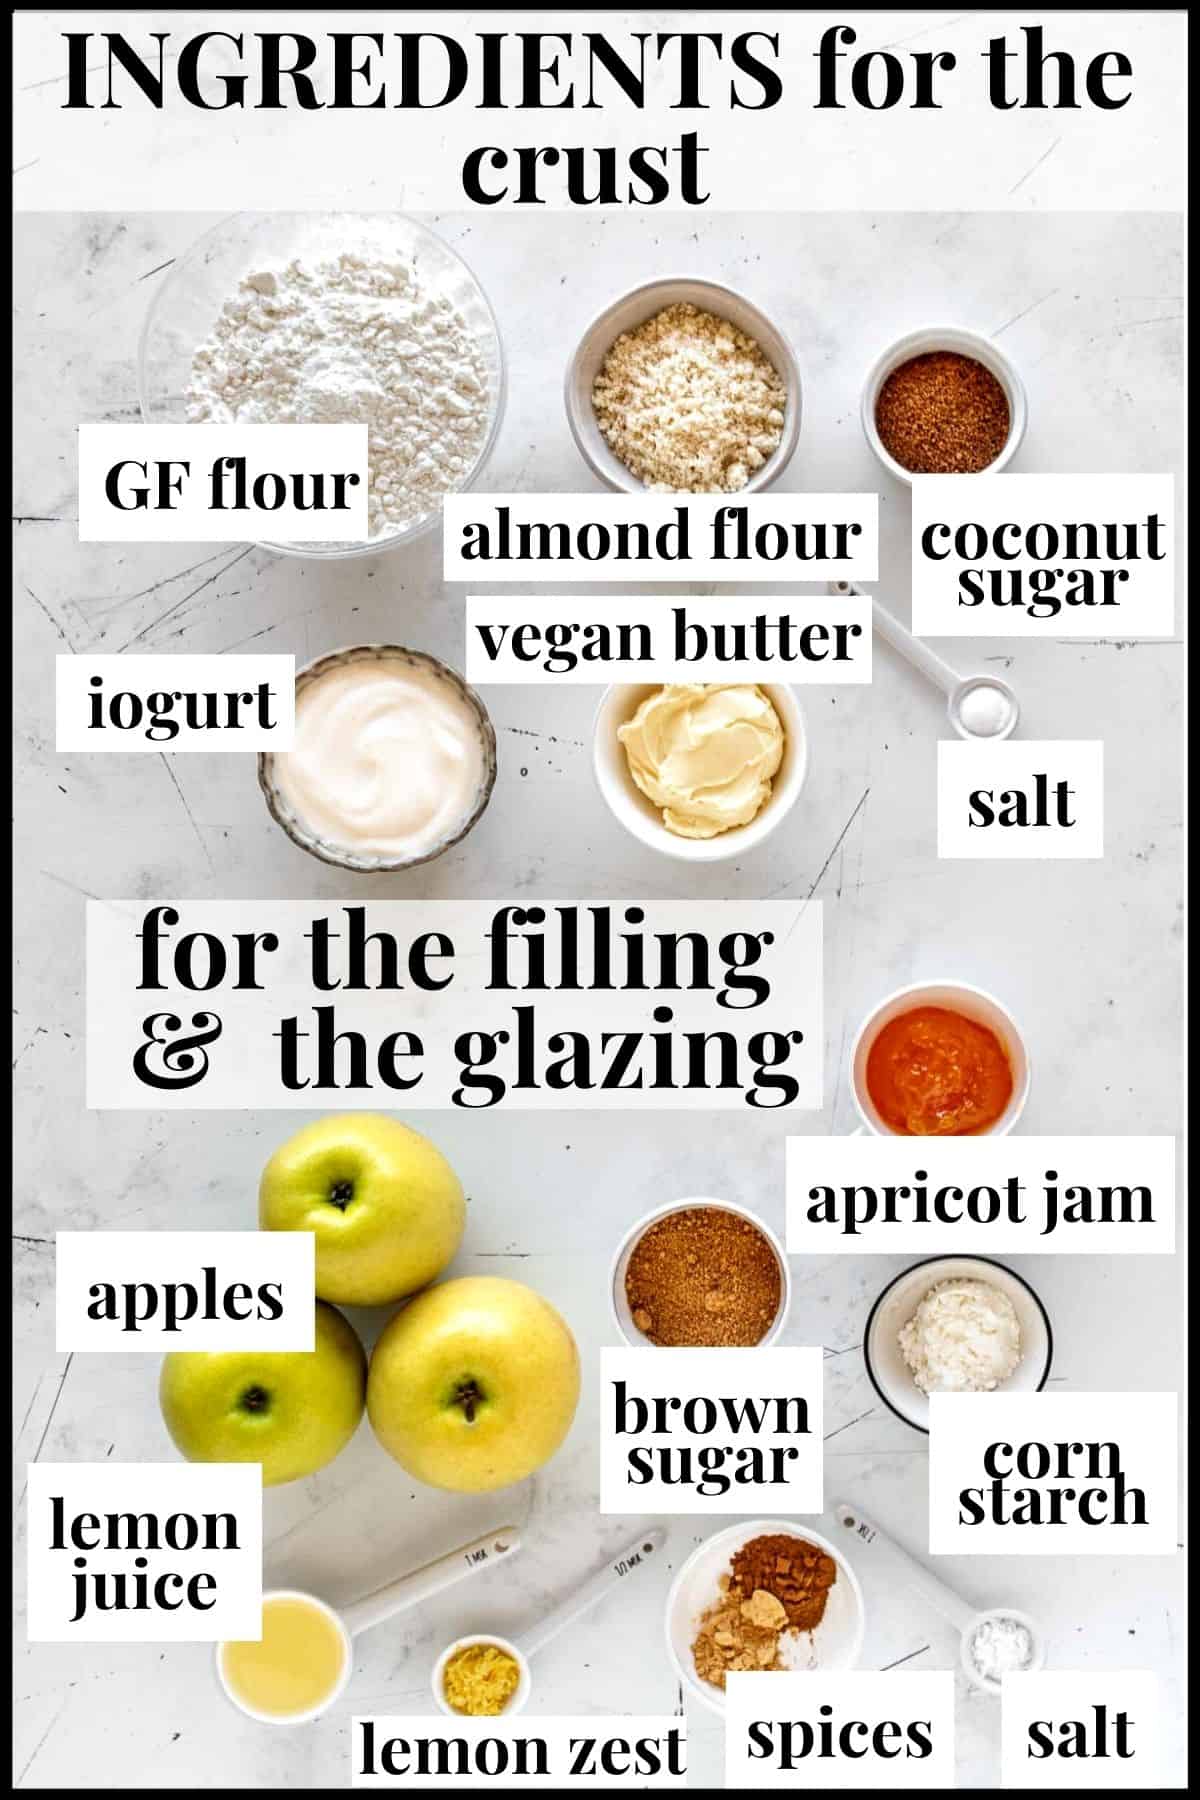 apple galette ingredients with text overlay naming the ingredients